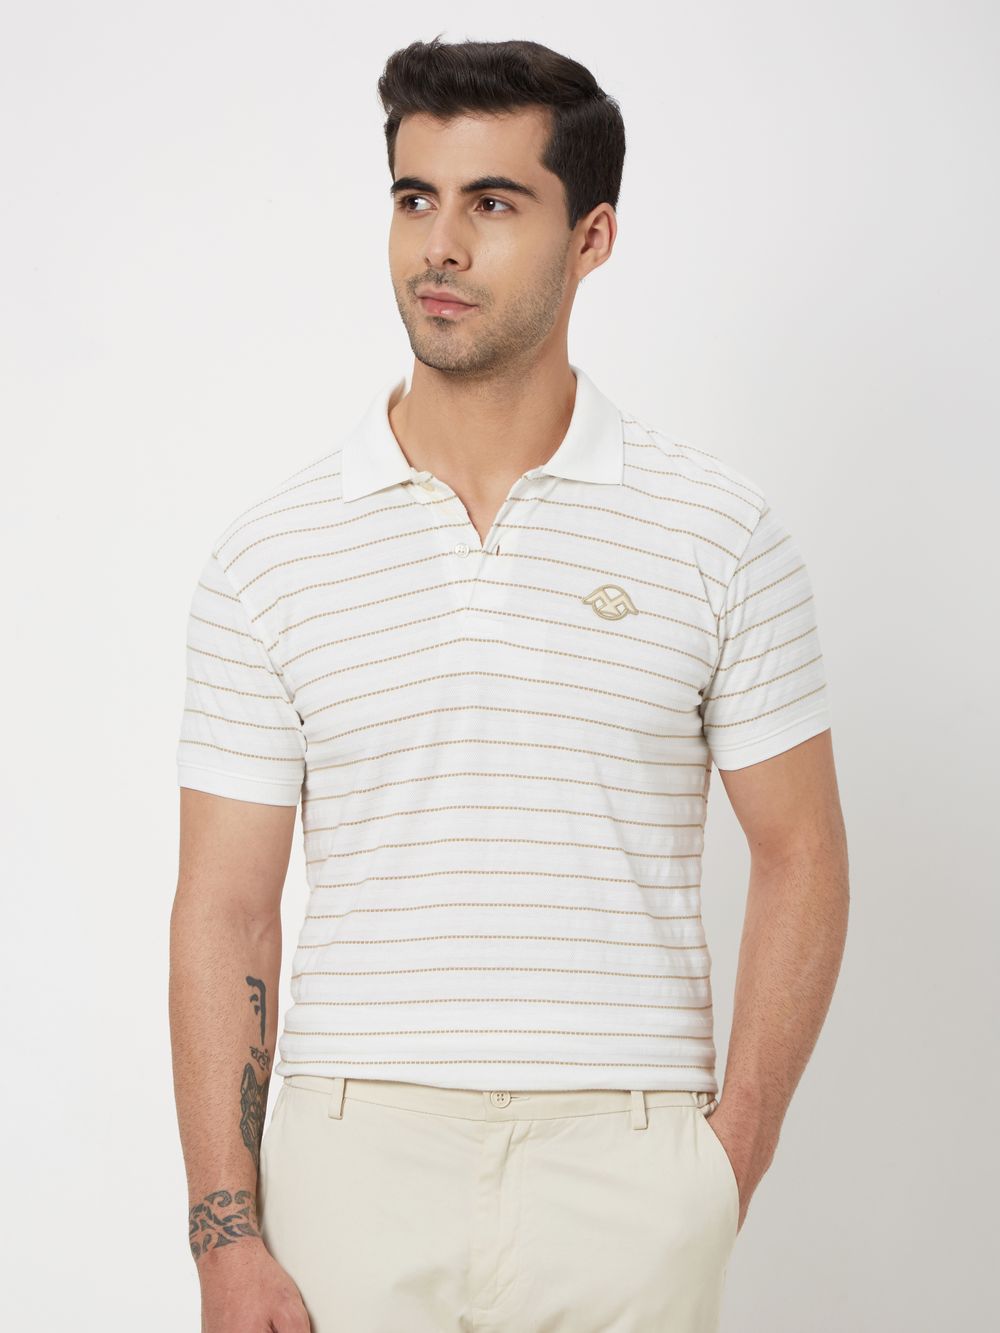 Off White & Beige Striped Jersey Polo T-Shirt